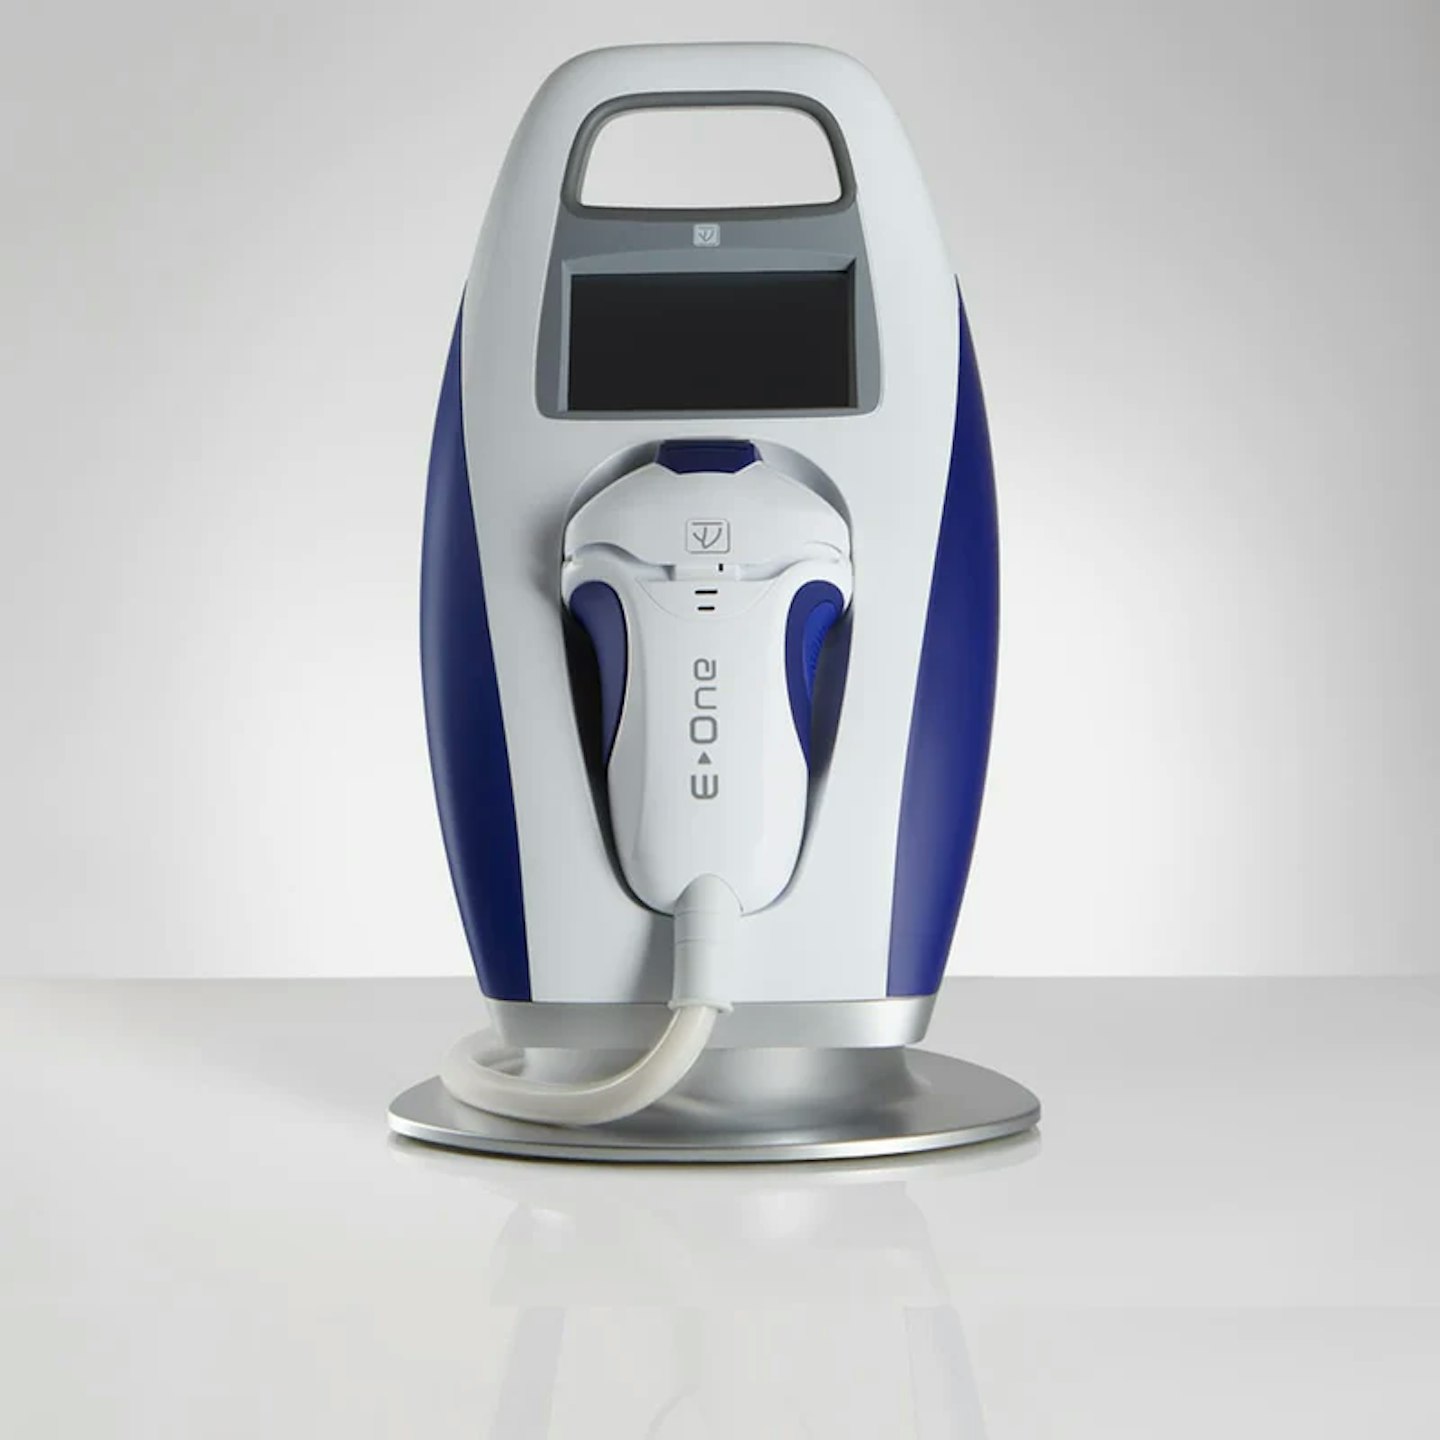 E-One IPL Clinic Permanent Hair Removal Device